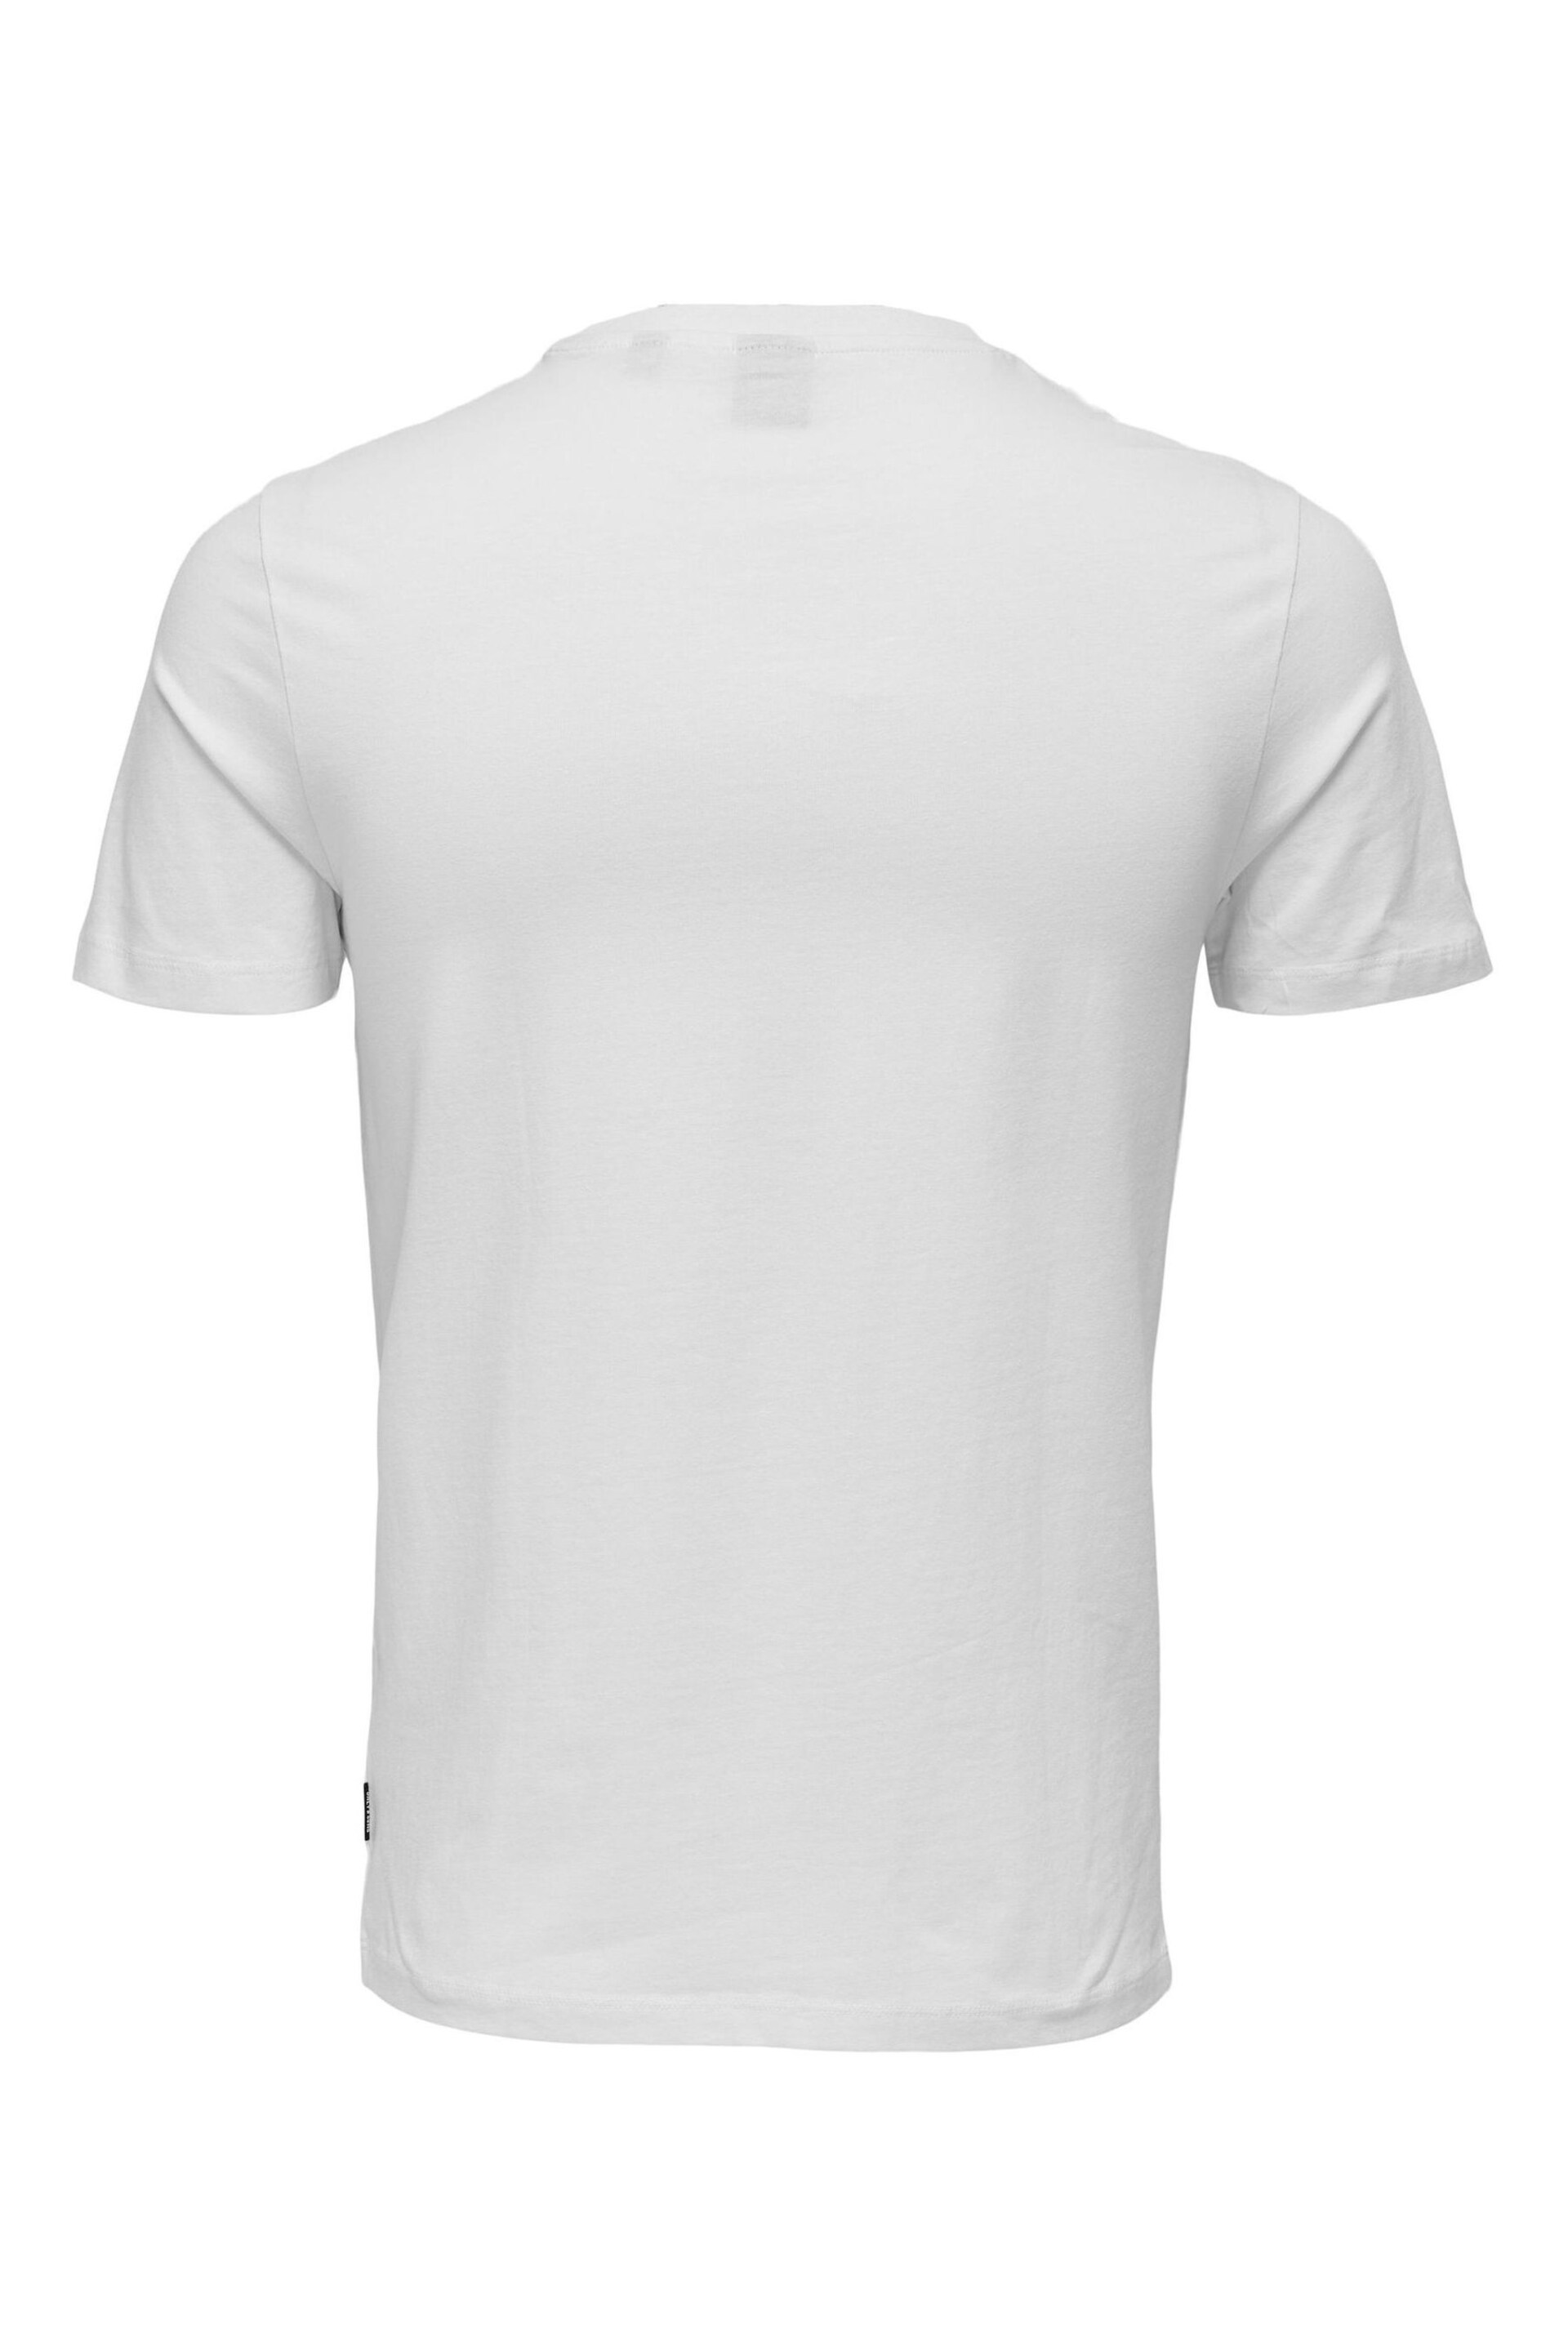 Only & Sons White 2 Pack Oversized Heavy Weight T-Shirt - Image 6 of 6